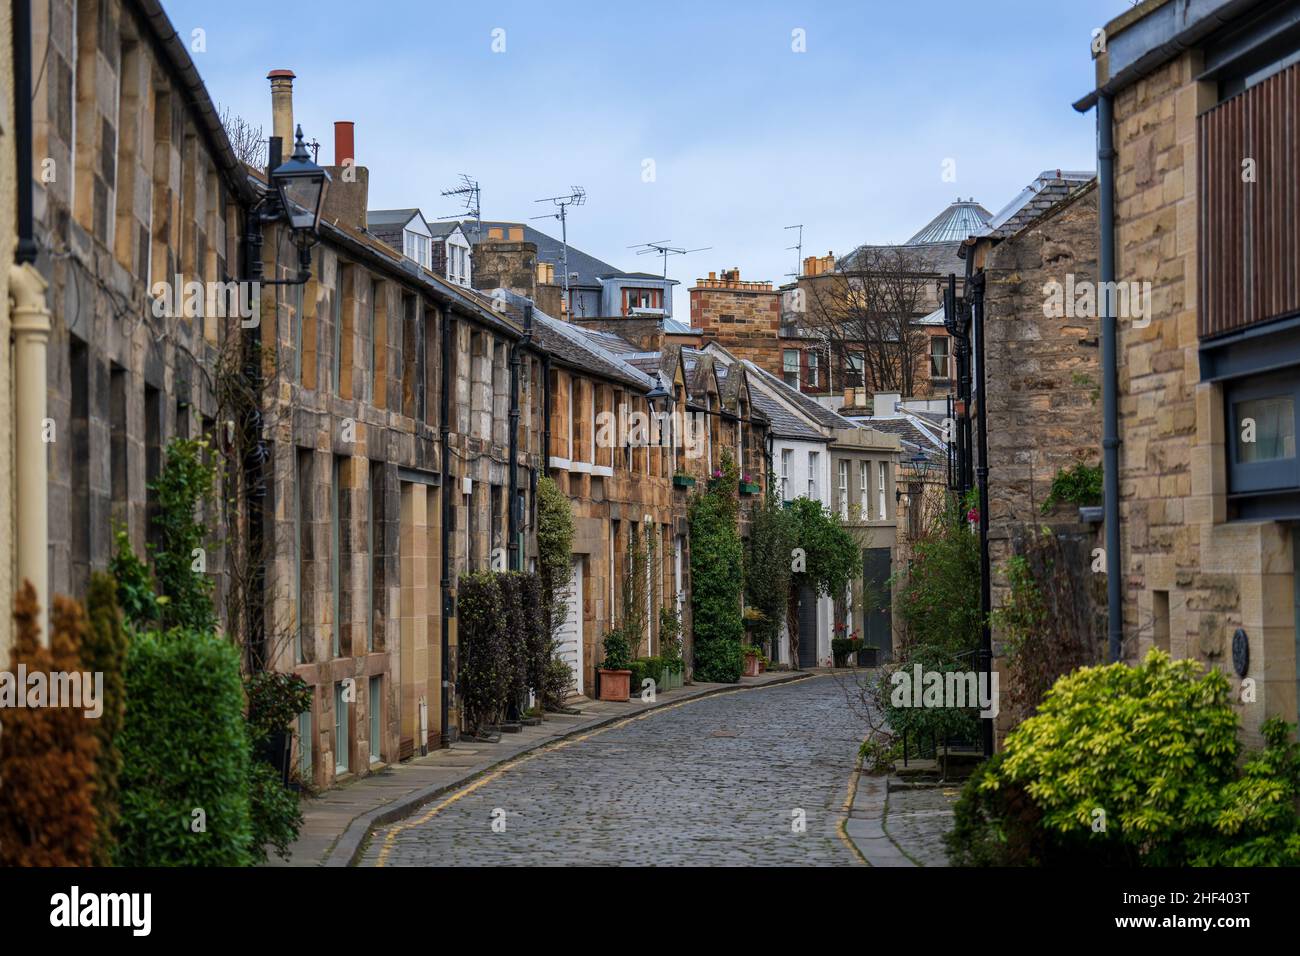 Evening view of historic buildings in Edinburgh Old Town , Scotland, UK Stock Photo